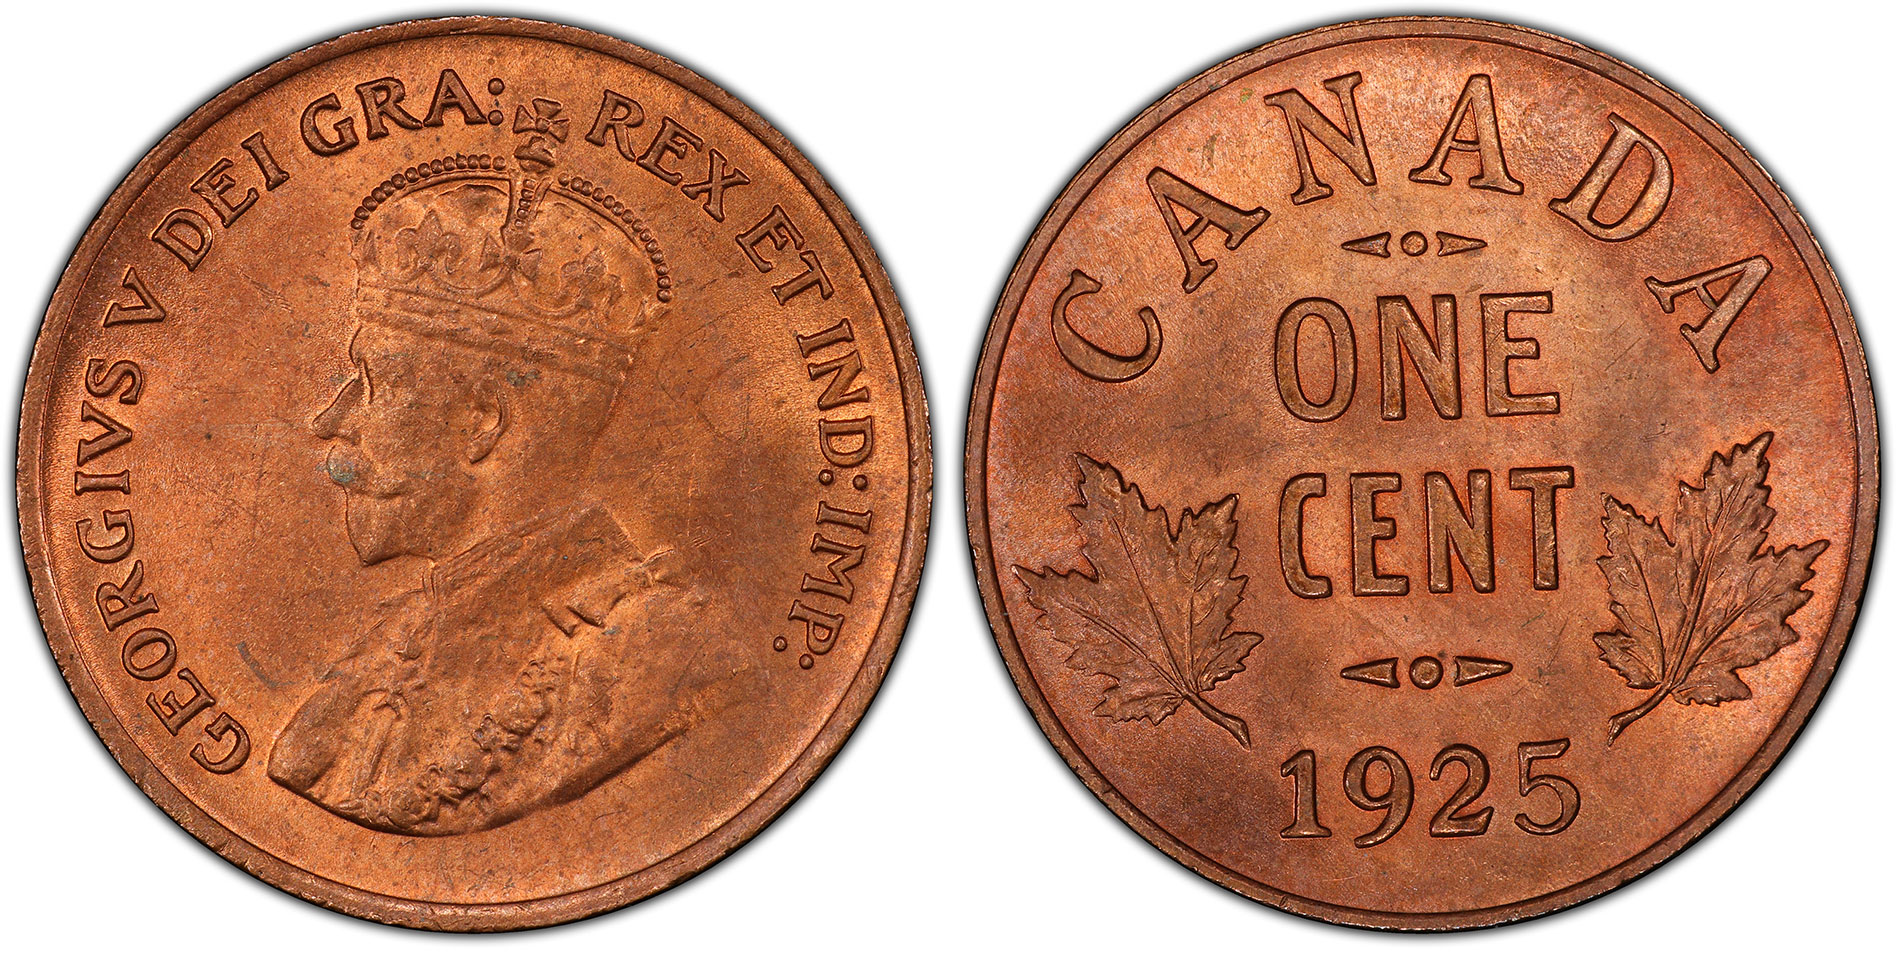 1925 Canada Cents - PCGS